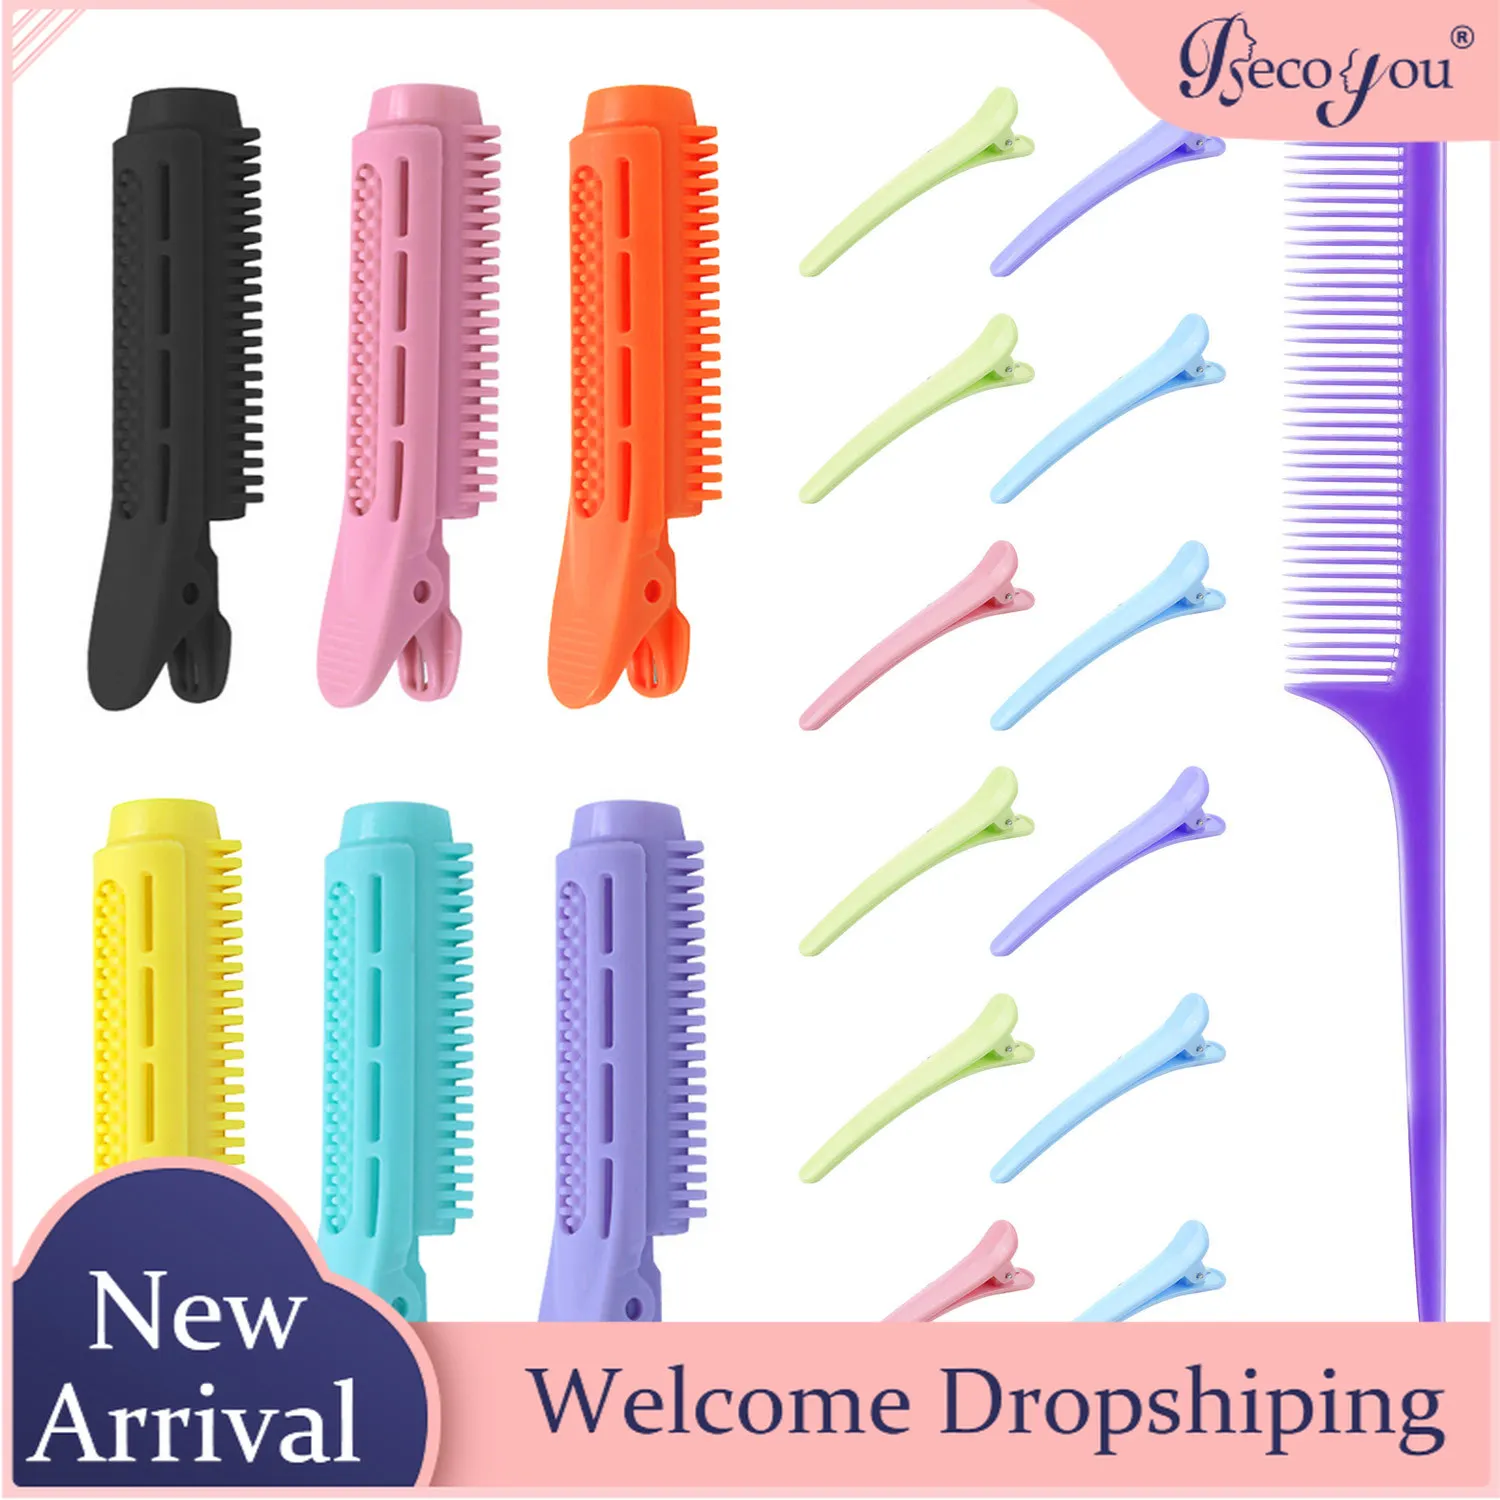 

6pcs Natural Fluffy Volumizing Hair Root Clips with Tail Comb and 12pcs Duck Bill Clips for Home Salon Hair Styling Supplies